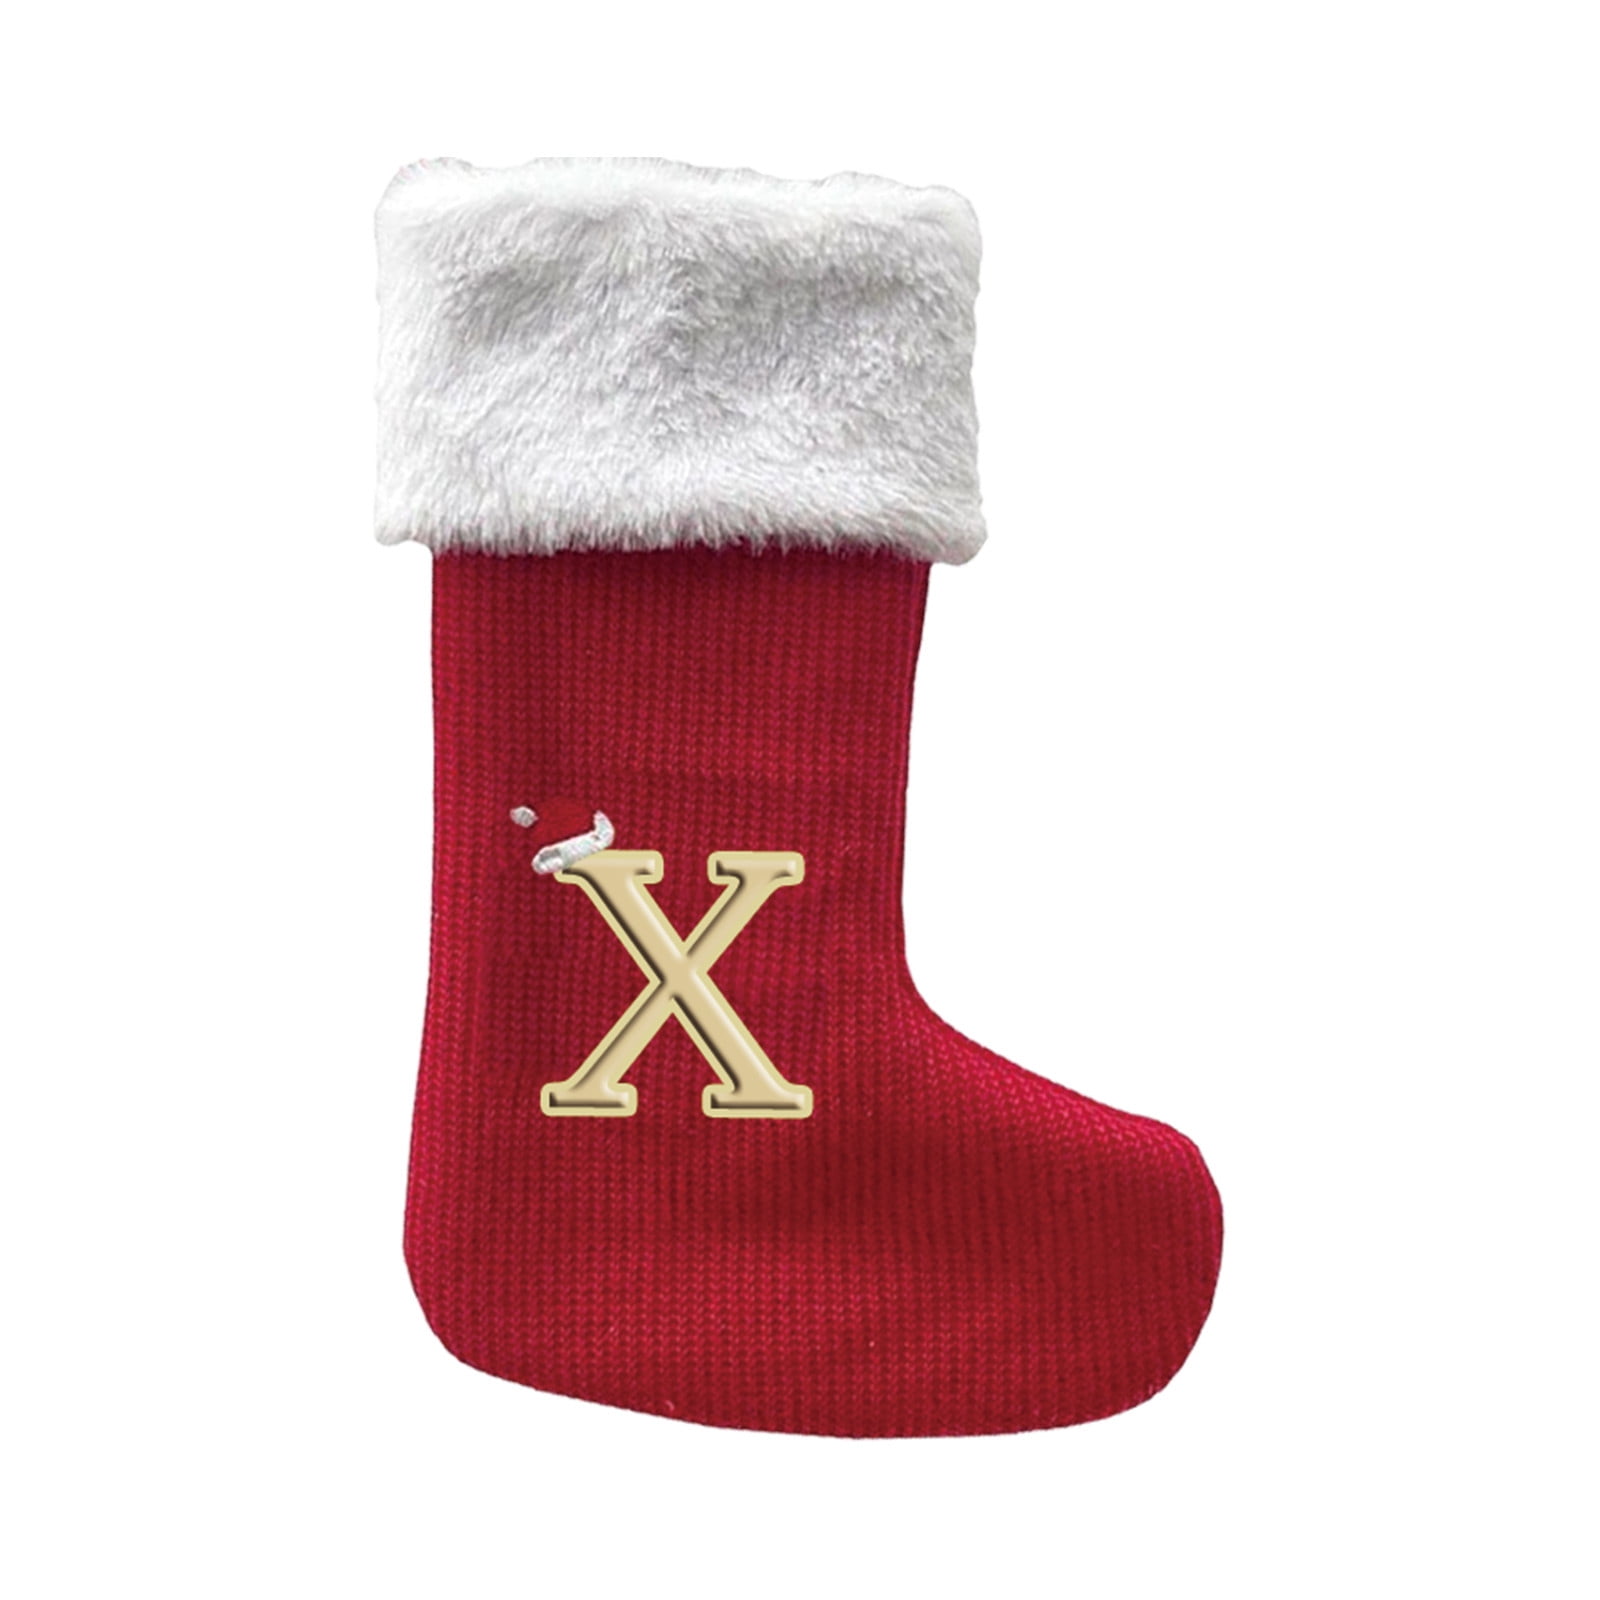 AURIGATE 3.5 Inches Initial Monogram Embroidered Christmas Stocking Red  Velvet with White Super Soft Plush Cuffs Christmas Decorations Stocking